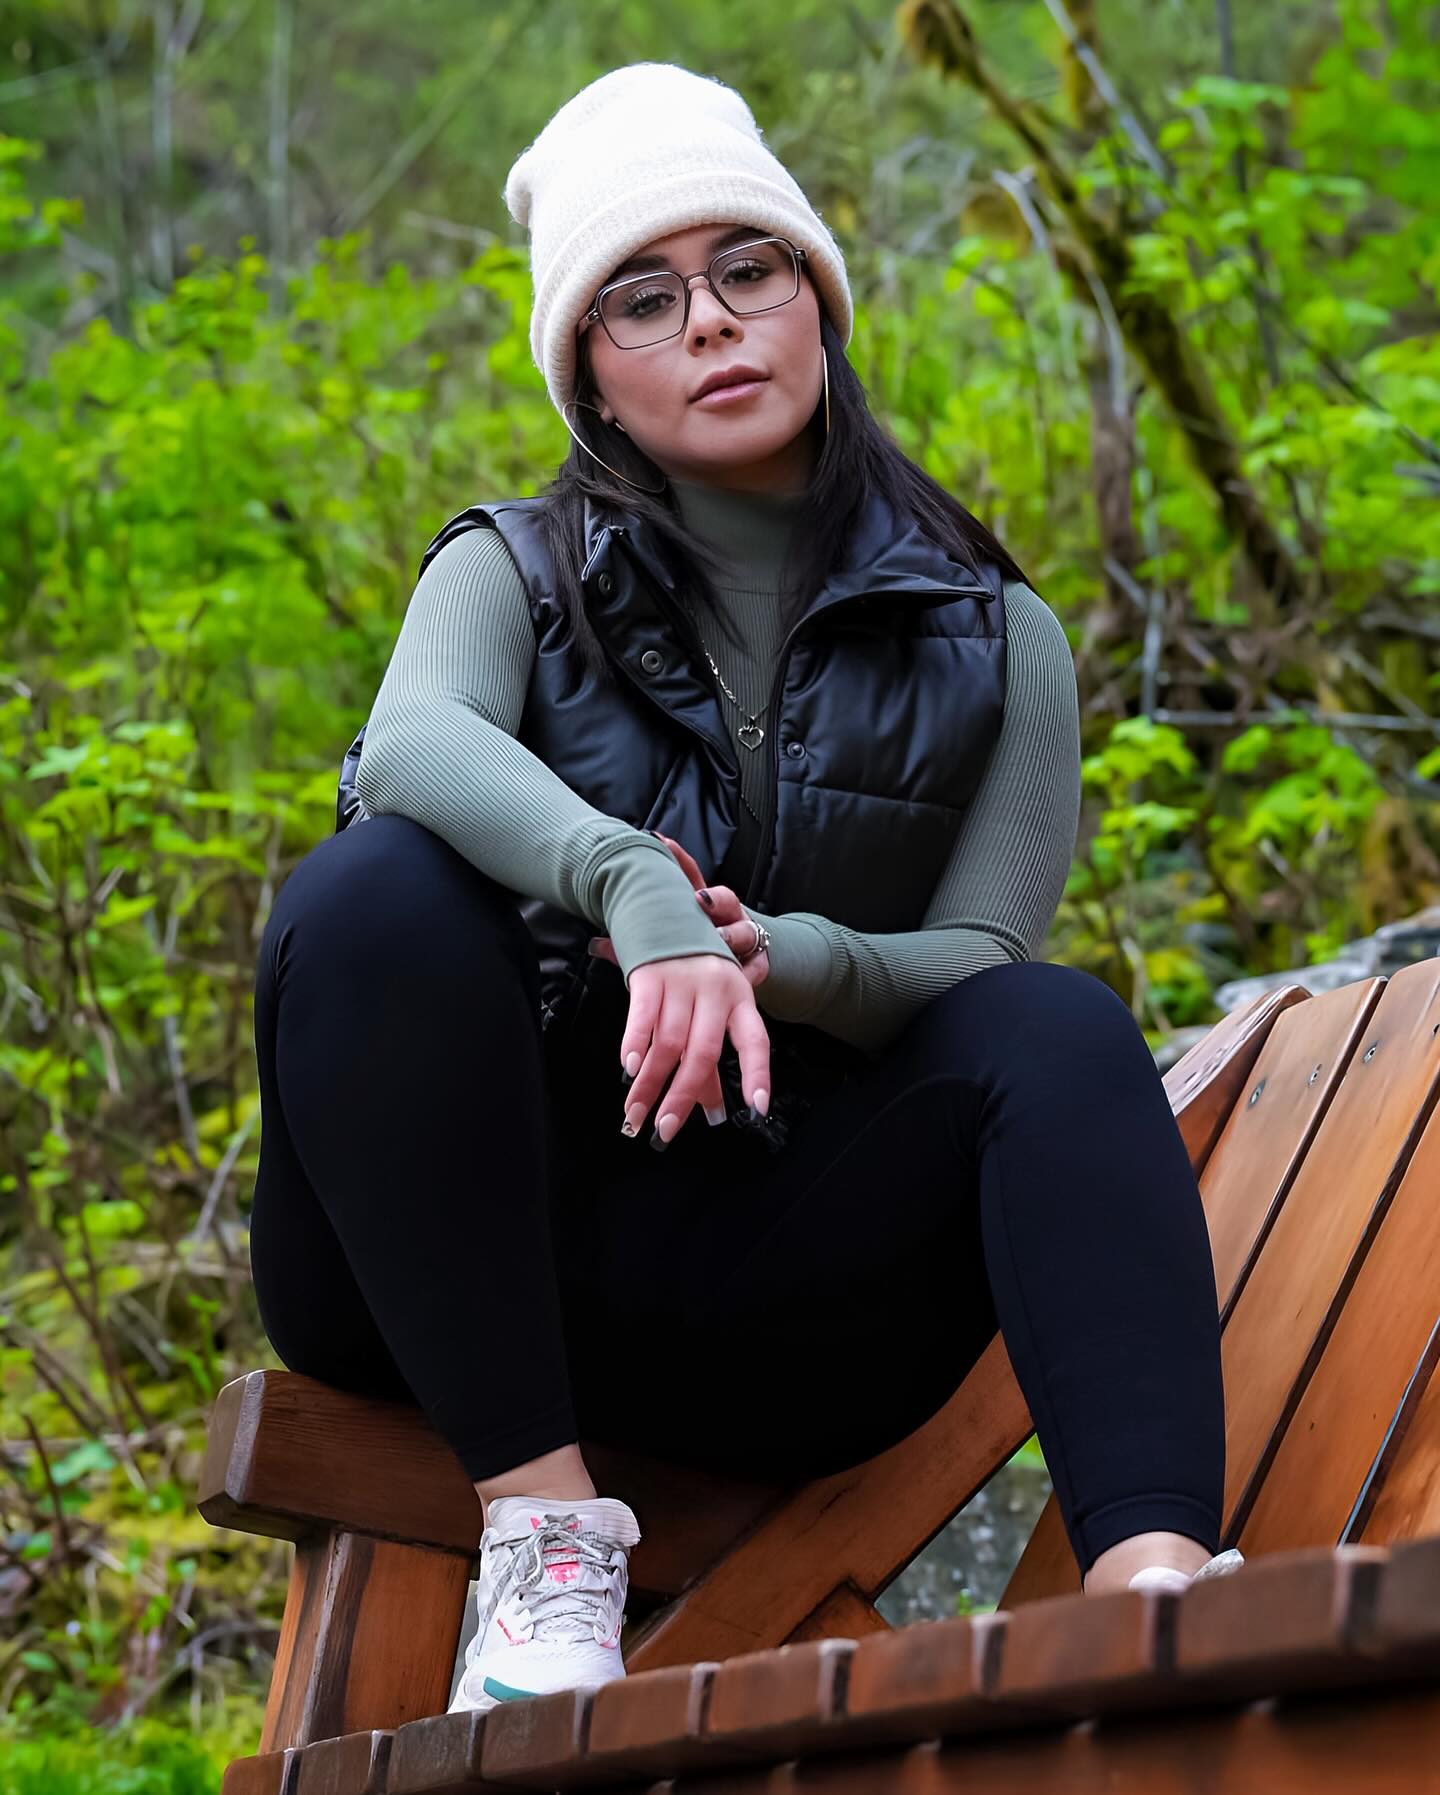 The Earth 🌎 Does Not Belong To Us , We Belong To Earth 🫶🌲
.
.
.
#nature #fridayvibes #oregon #portrait #outdoors #model #fashion #follow #activities